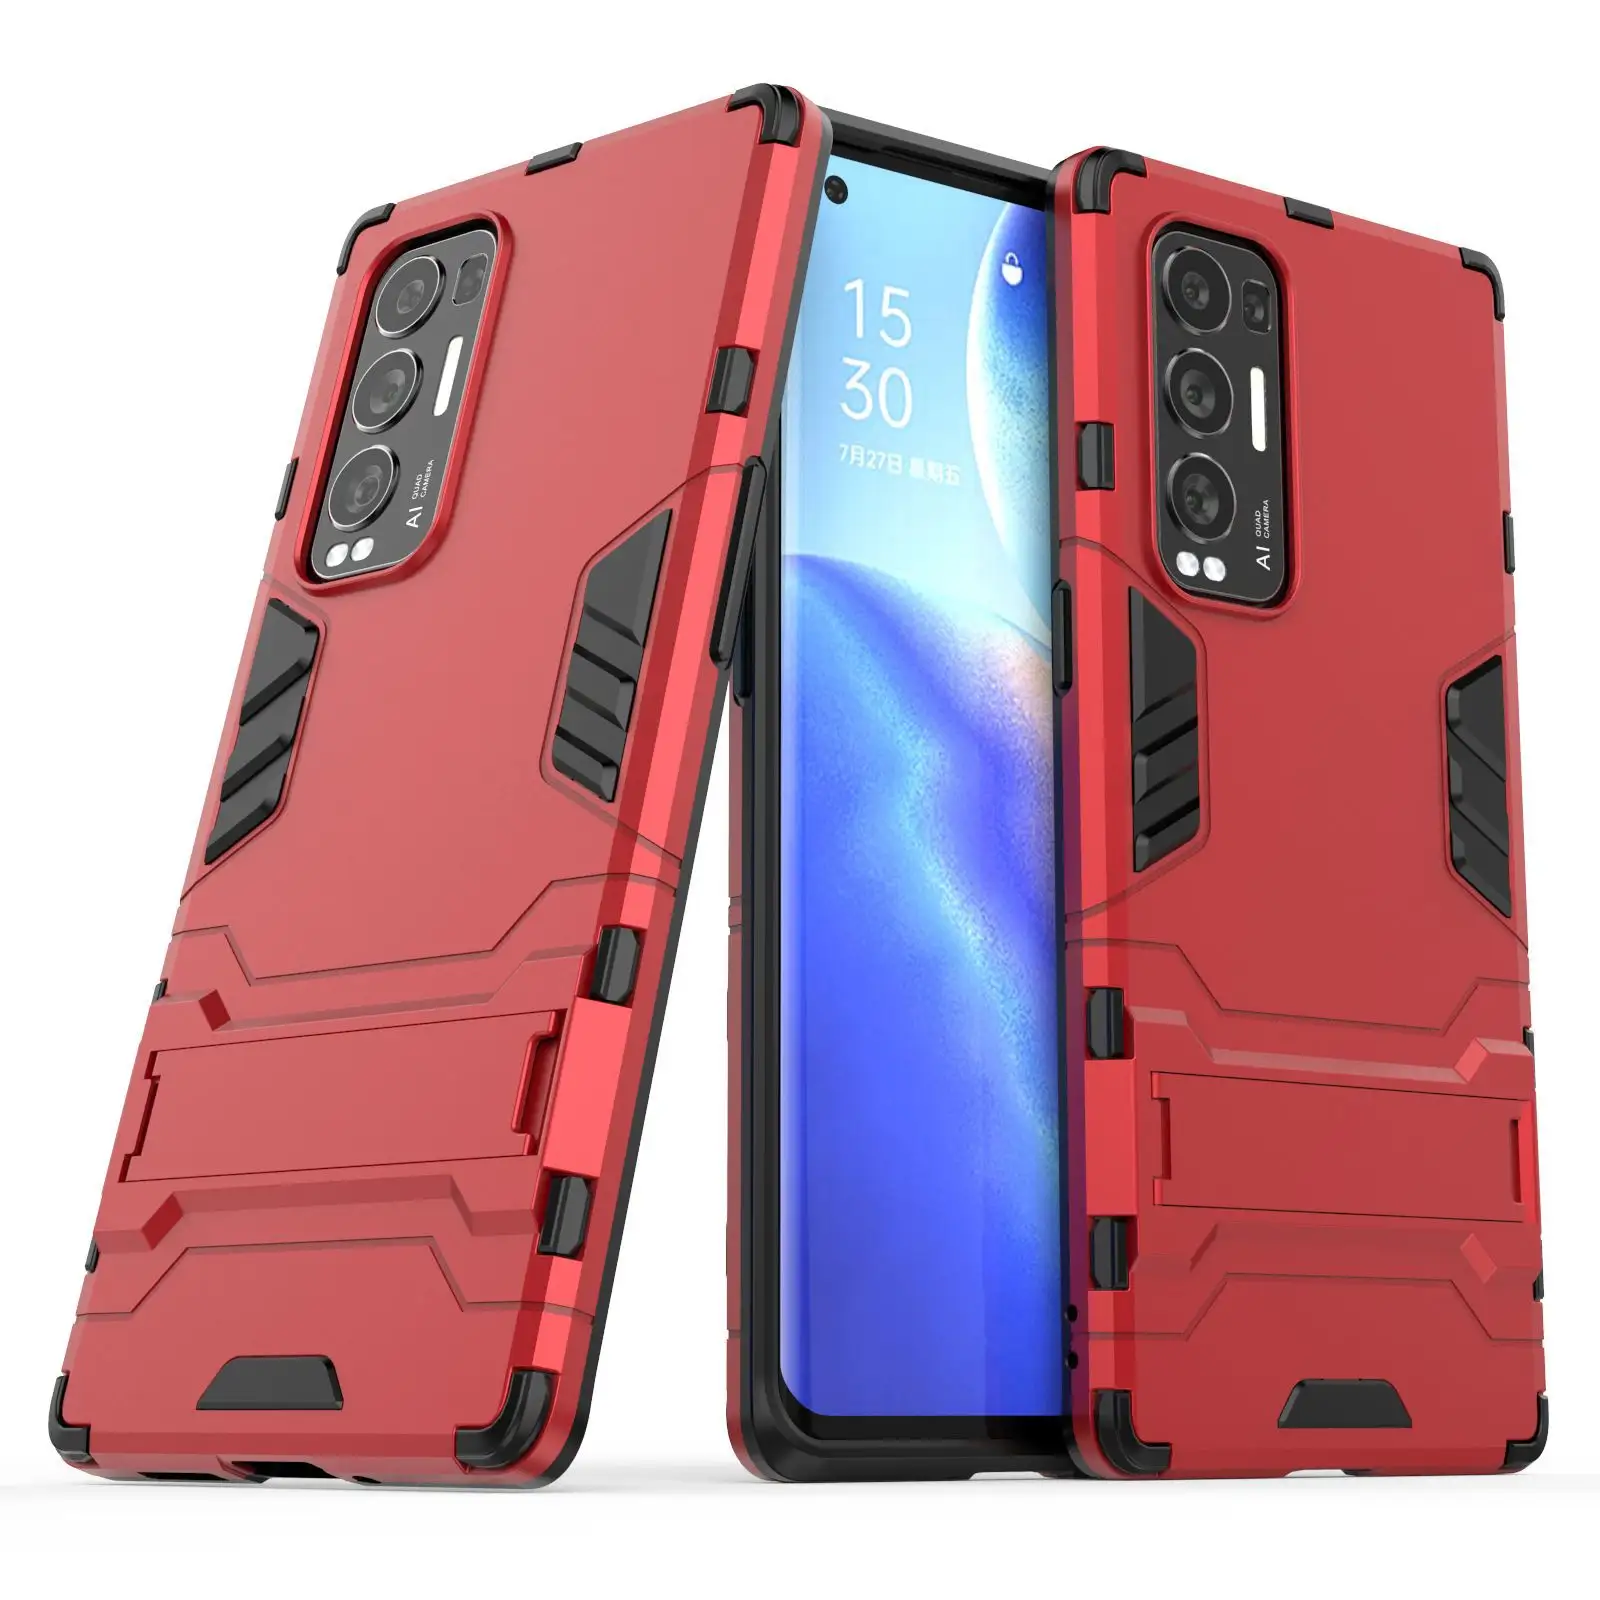 Ring Iron Man Shock Proof Case for OPPO Reno 5 Pro plus Stand mobile phone case Reno 5 R11S R11 plus 2021 new cases